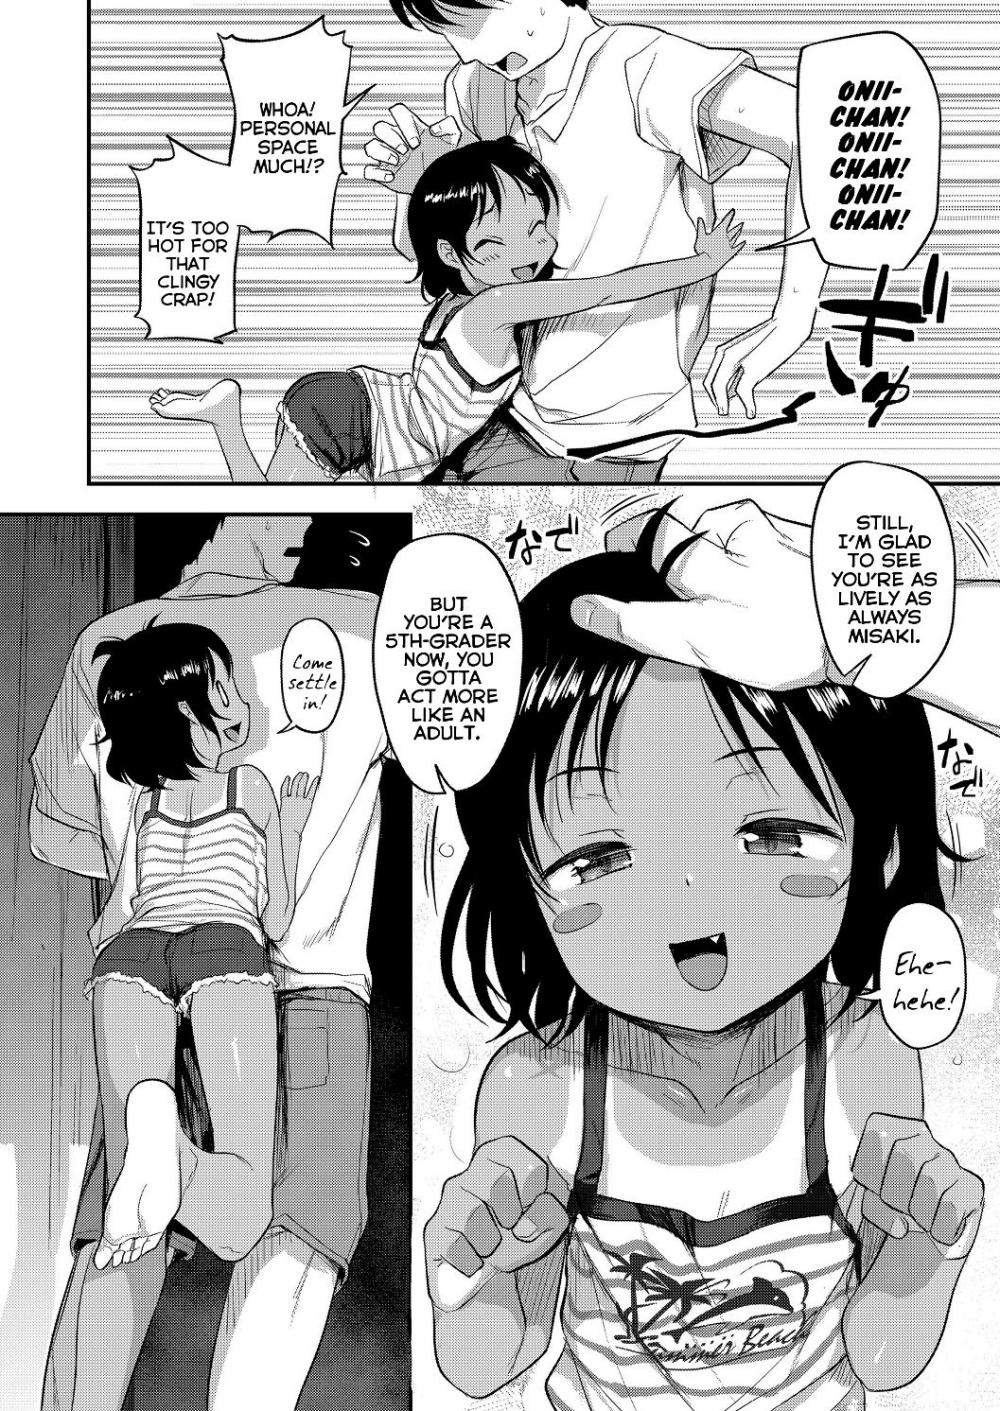 Hentai Manga Comic-What Kind of Weirdo Onii-chan Gets Excited From Seeing His Little Sister Naked?-Chapter 3-2